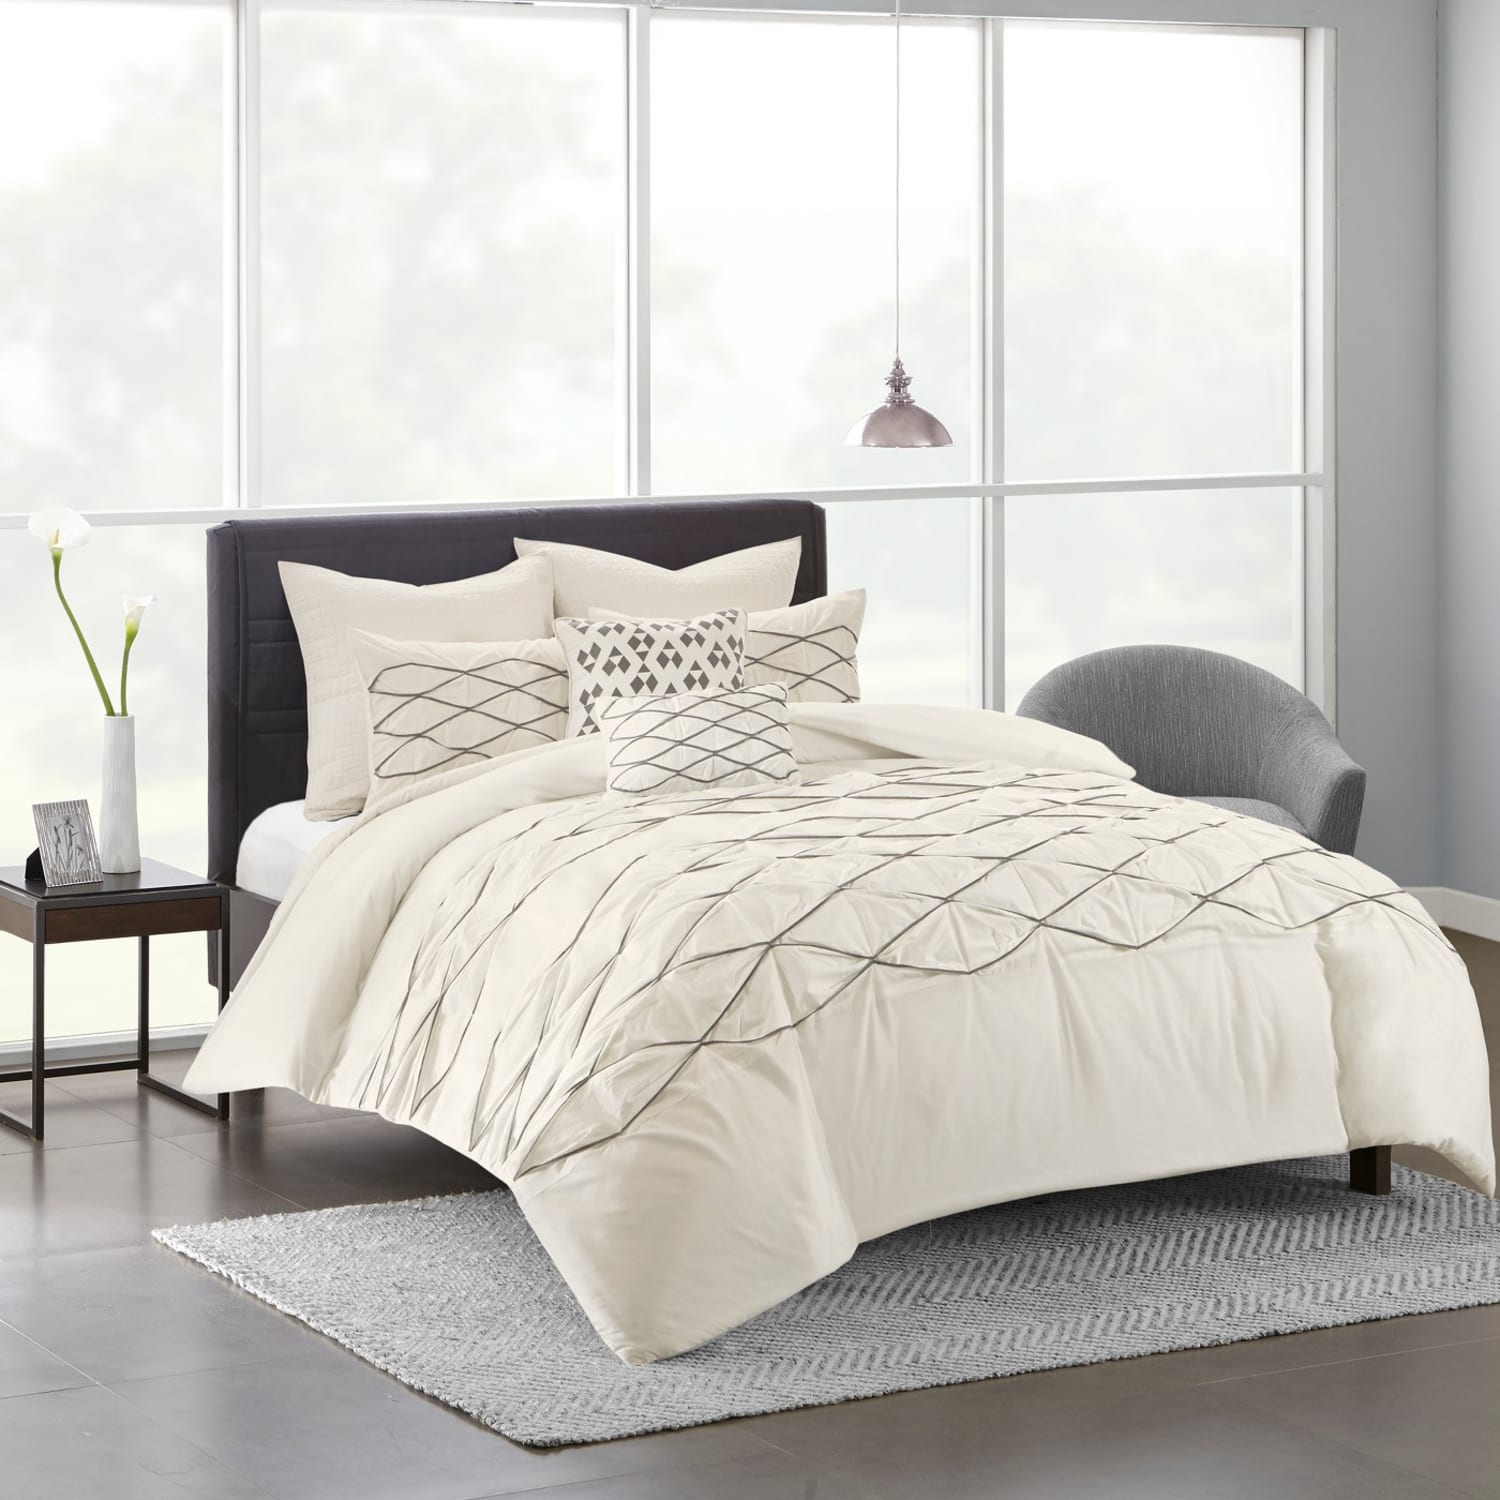 Comforter Or Duvet Apartment Therapy